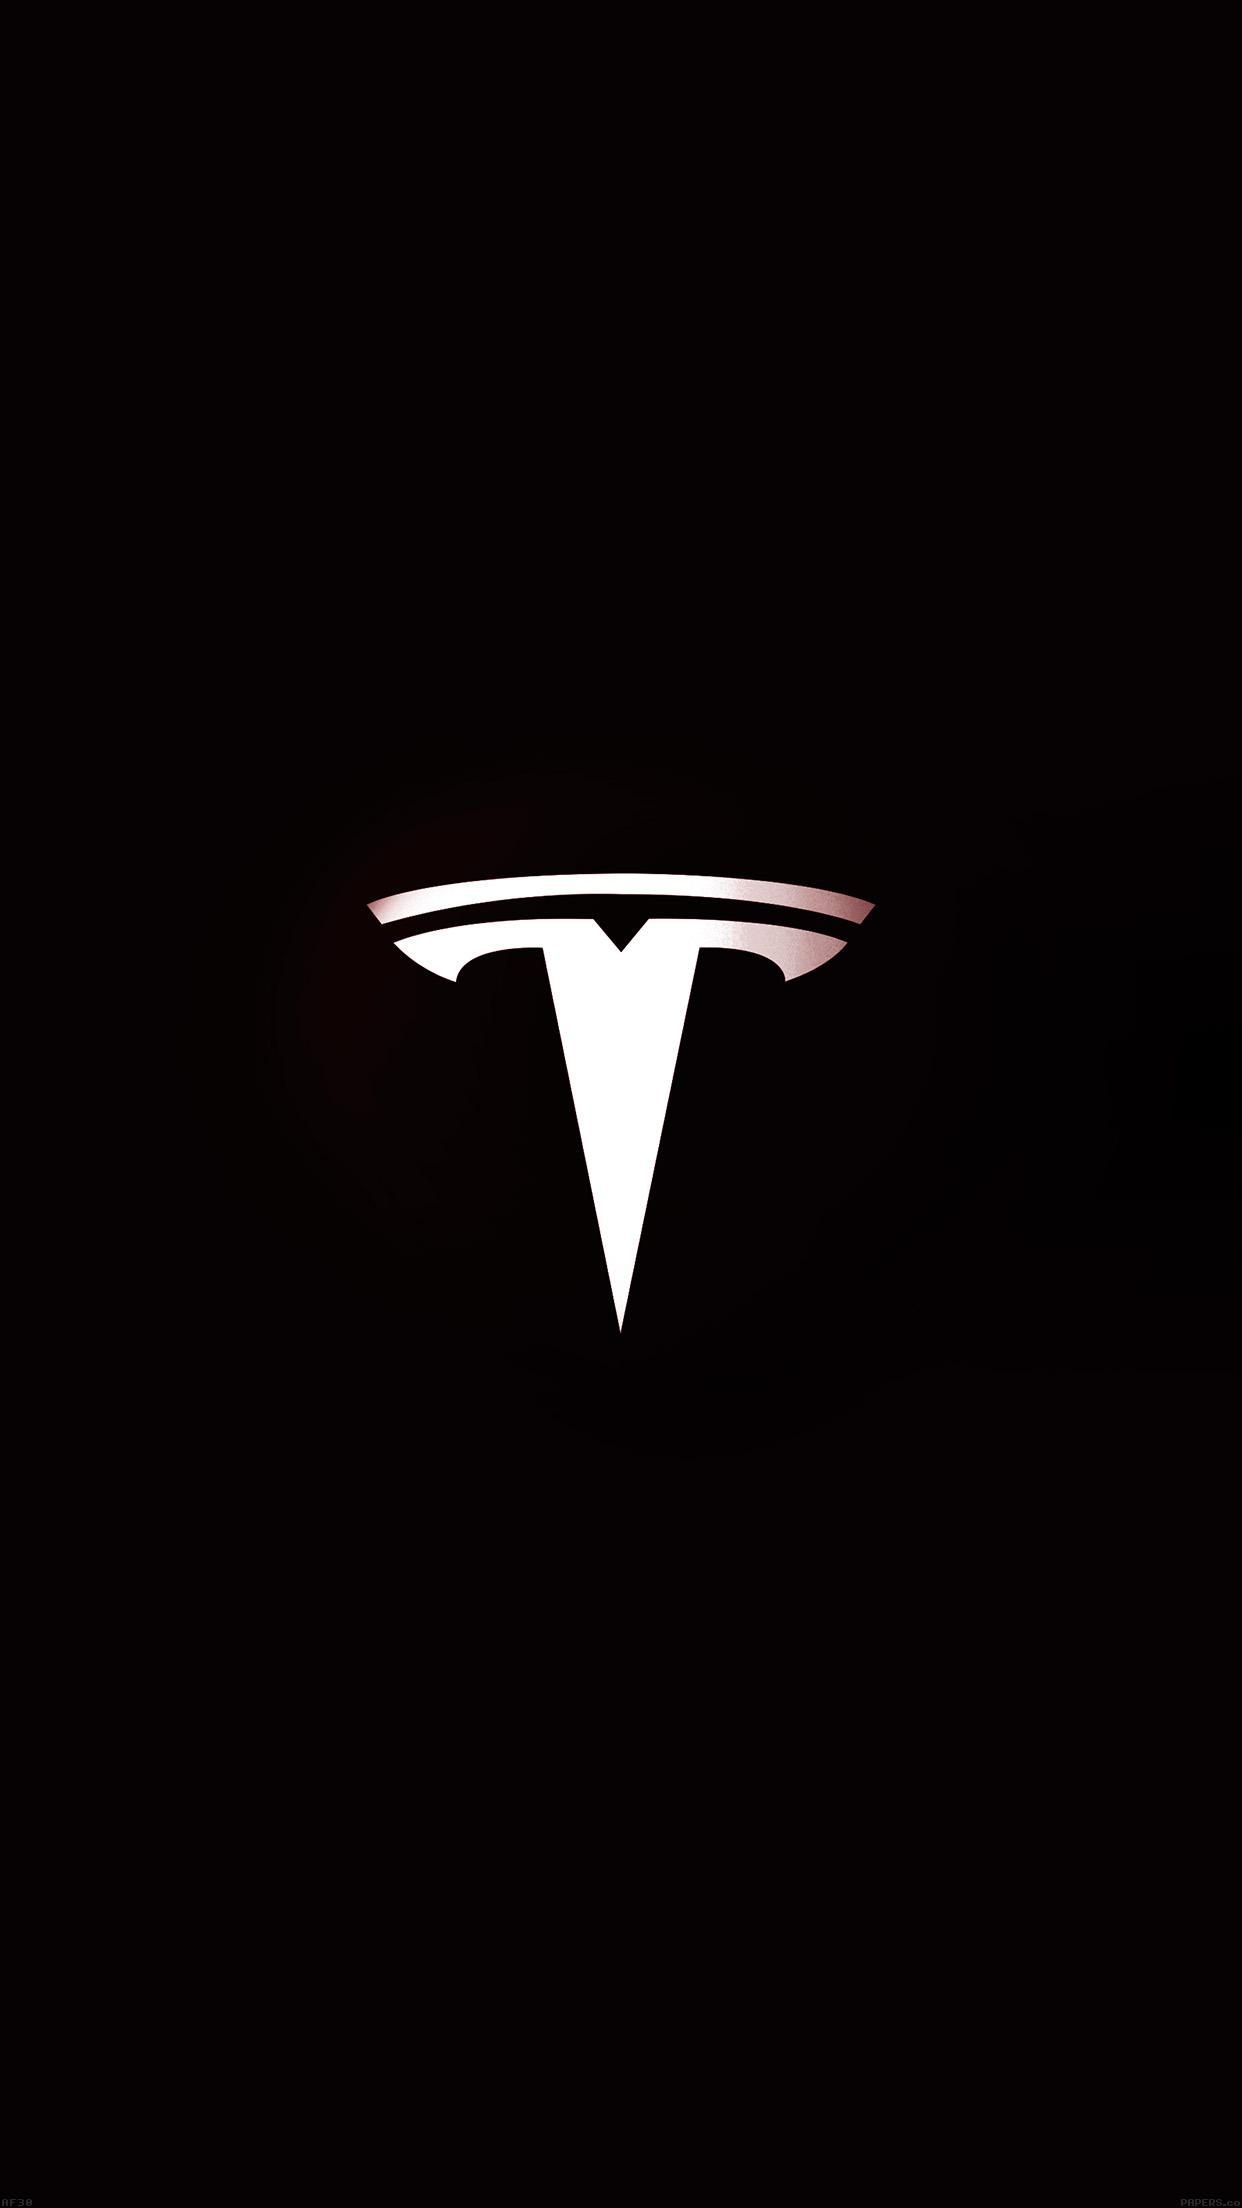 Tesla Wallpapers for iPhone X, 8, 7, 6